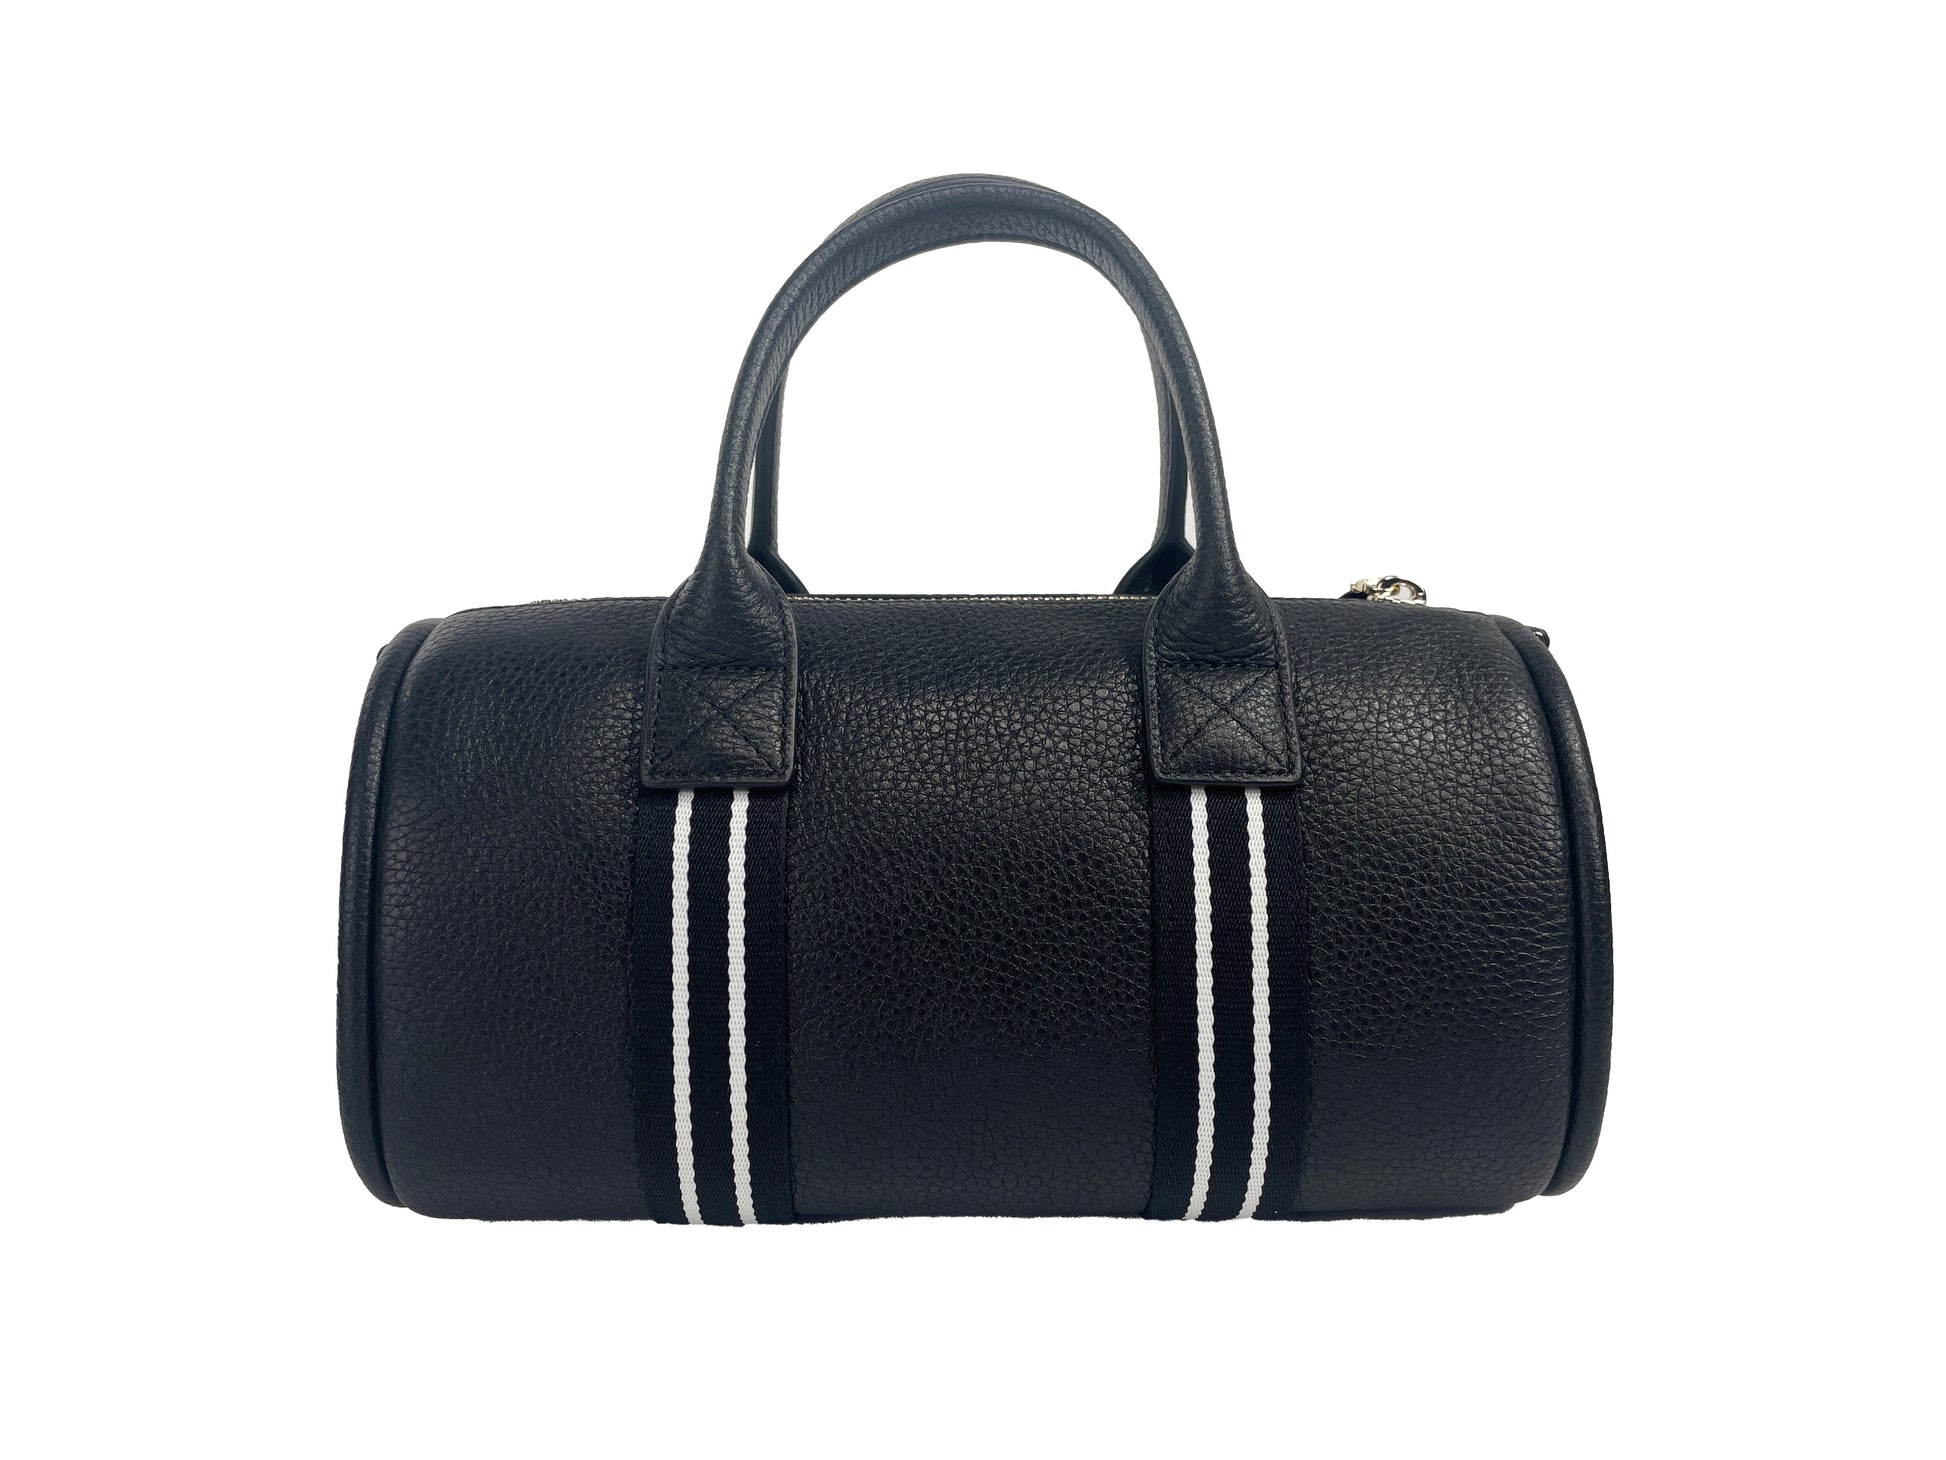 Kate Spade Rosie Small Duffle Leather Black Bag